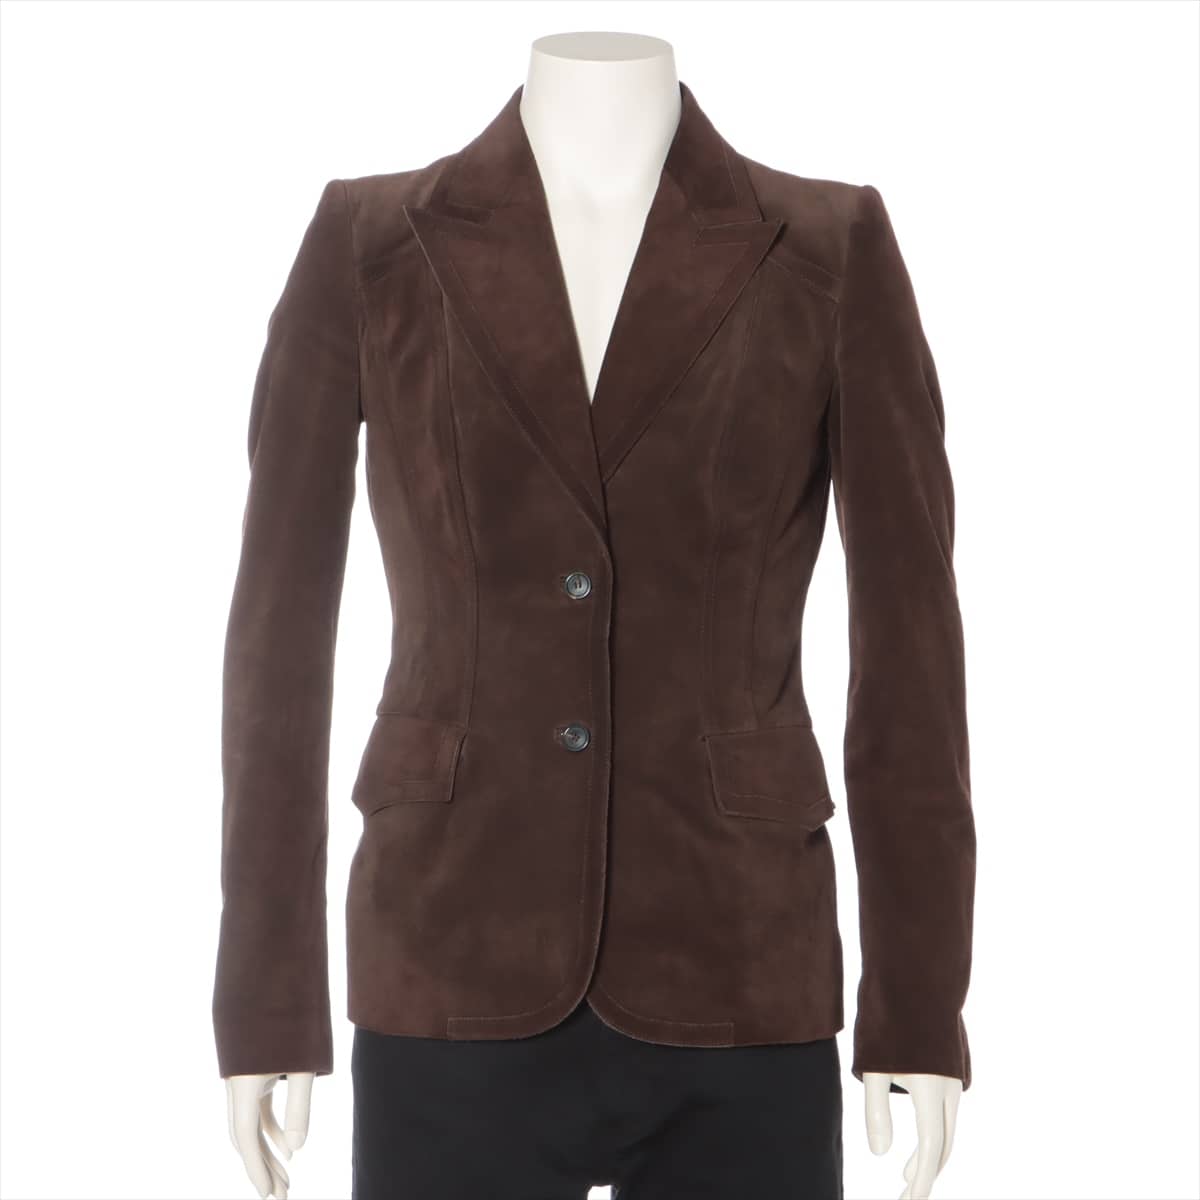 Gucci Suede Tailored jacket 44 Men's Brown